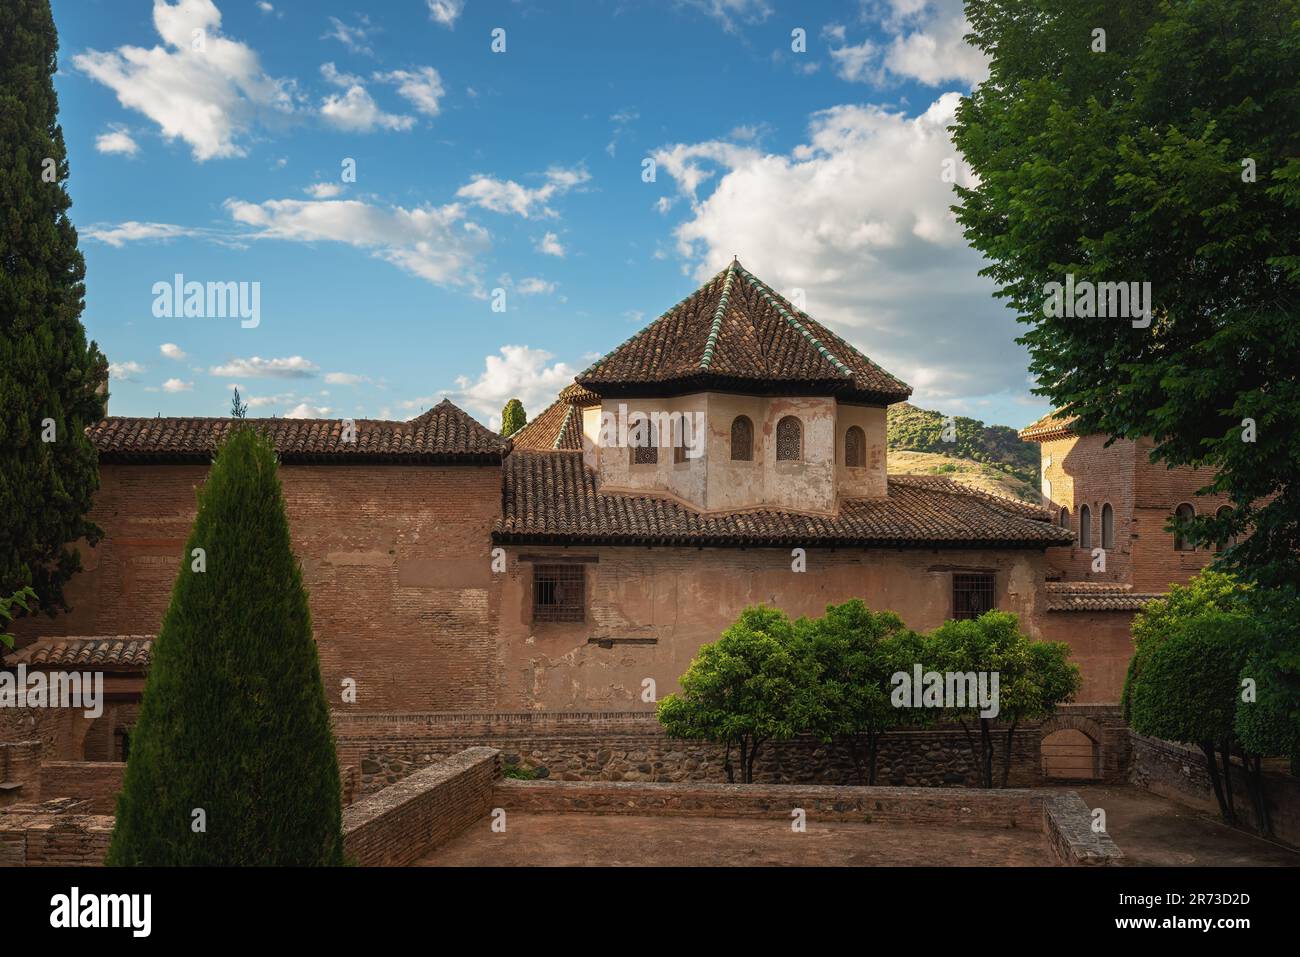 Tower of Hall of the Abencerrajes at Nasrid Palaces of Alhambra - Granada, Andalusia, Spain Stock Photo